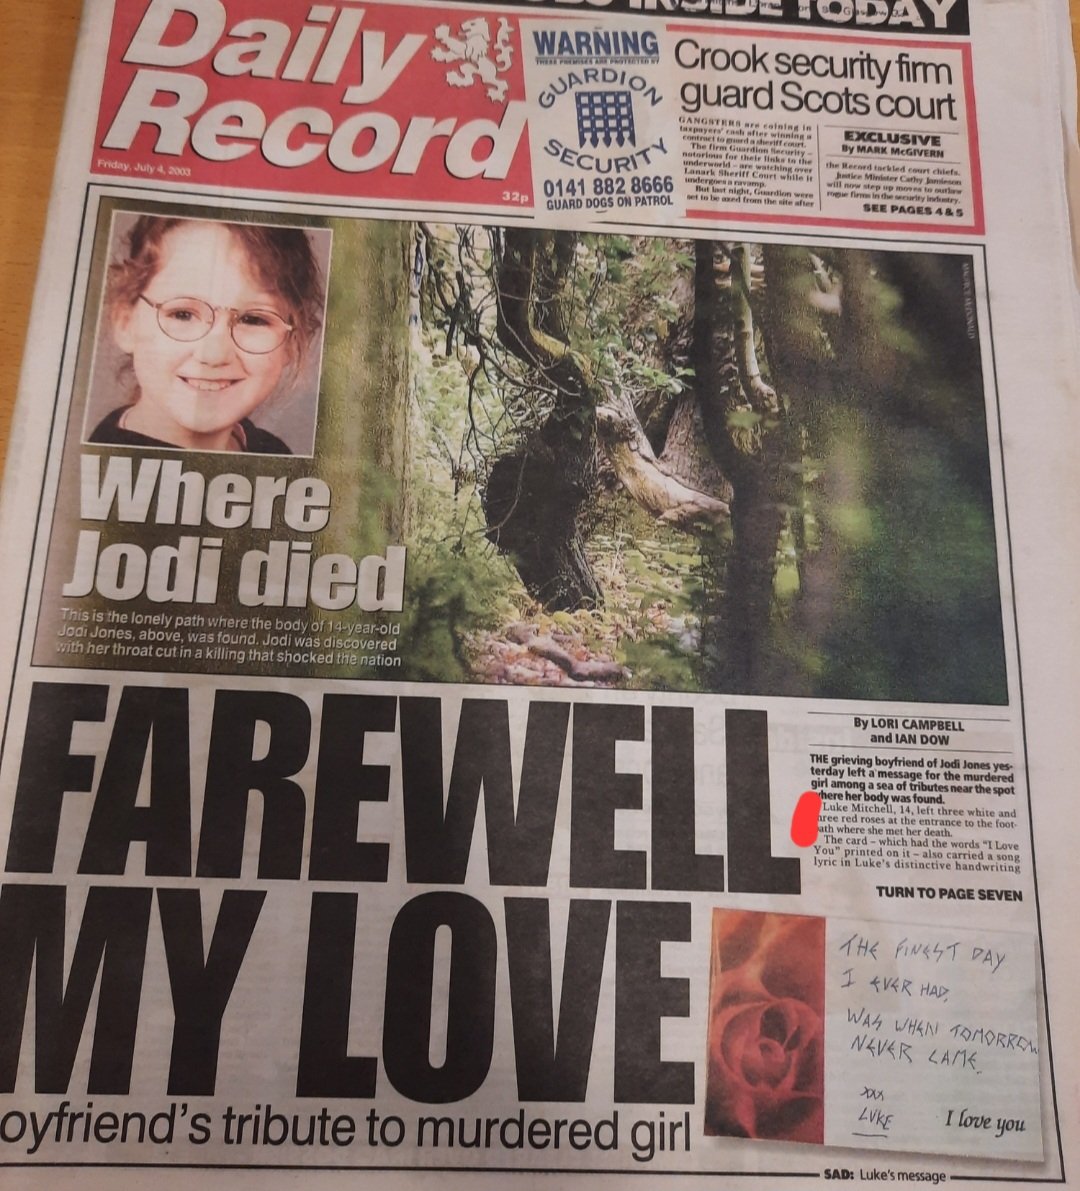 So   the 2nd July they print they can not name due to being a minor, but by the 4th they name 14 year old minor Luke Mitchell. 
That is the beginning of the witch trial, trial by media on Luke Mitchell and his family. #justiceforjodiandluke
#trialbymedia @PoliceScotland  #corrupt